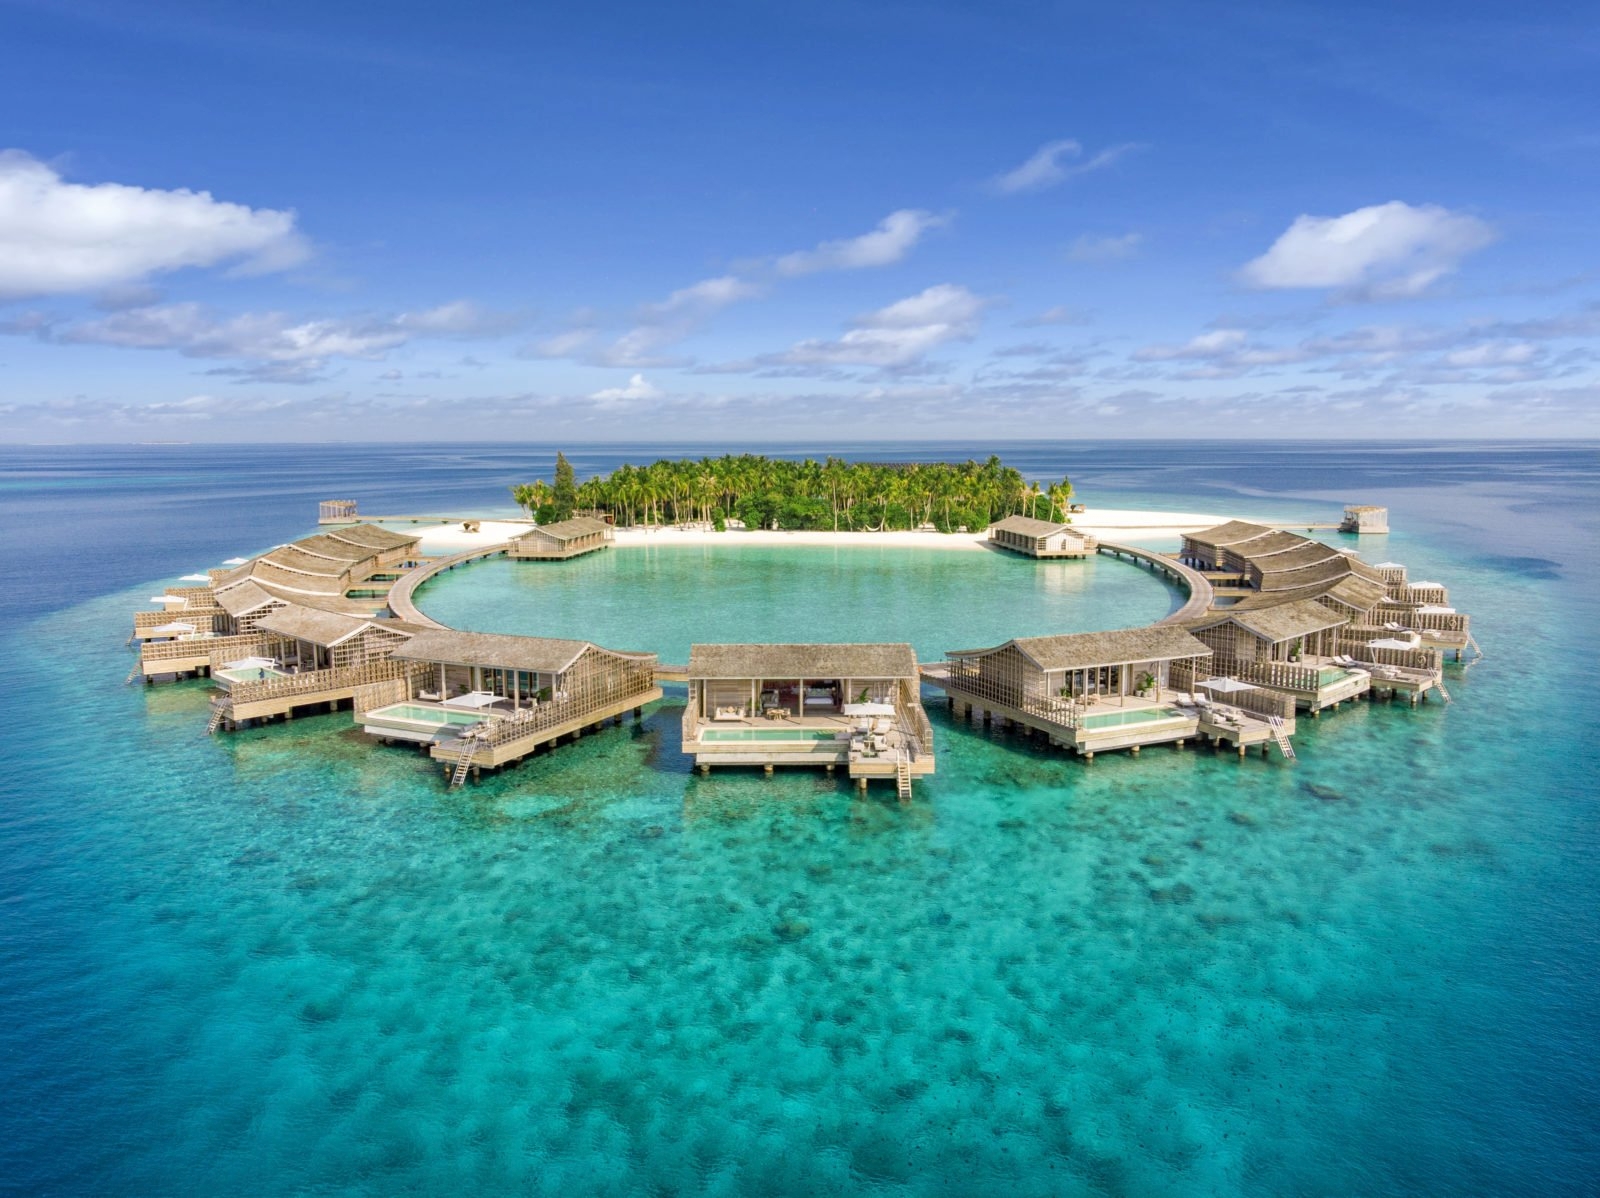 Aerial view over the Residences at luxury resort Kudadoo Private Island in the Maldives